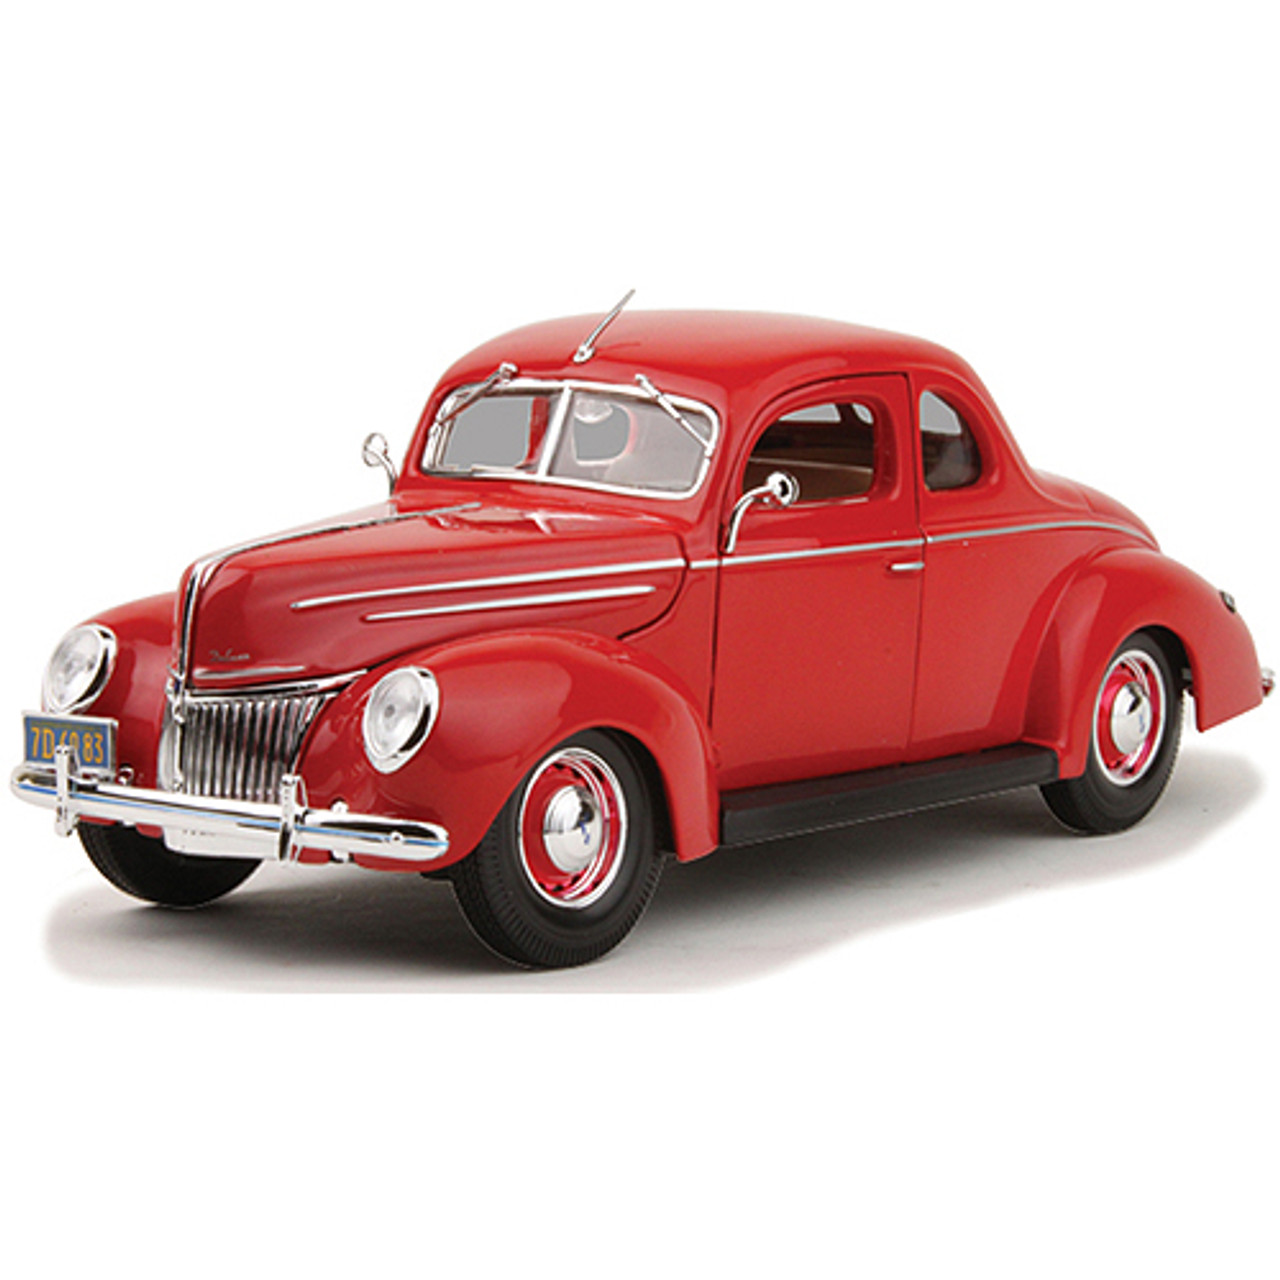 1939 Ford DeLuxe Coupe 1:18 Scale Diecast Model by Maisto